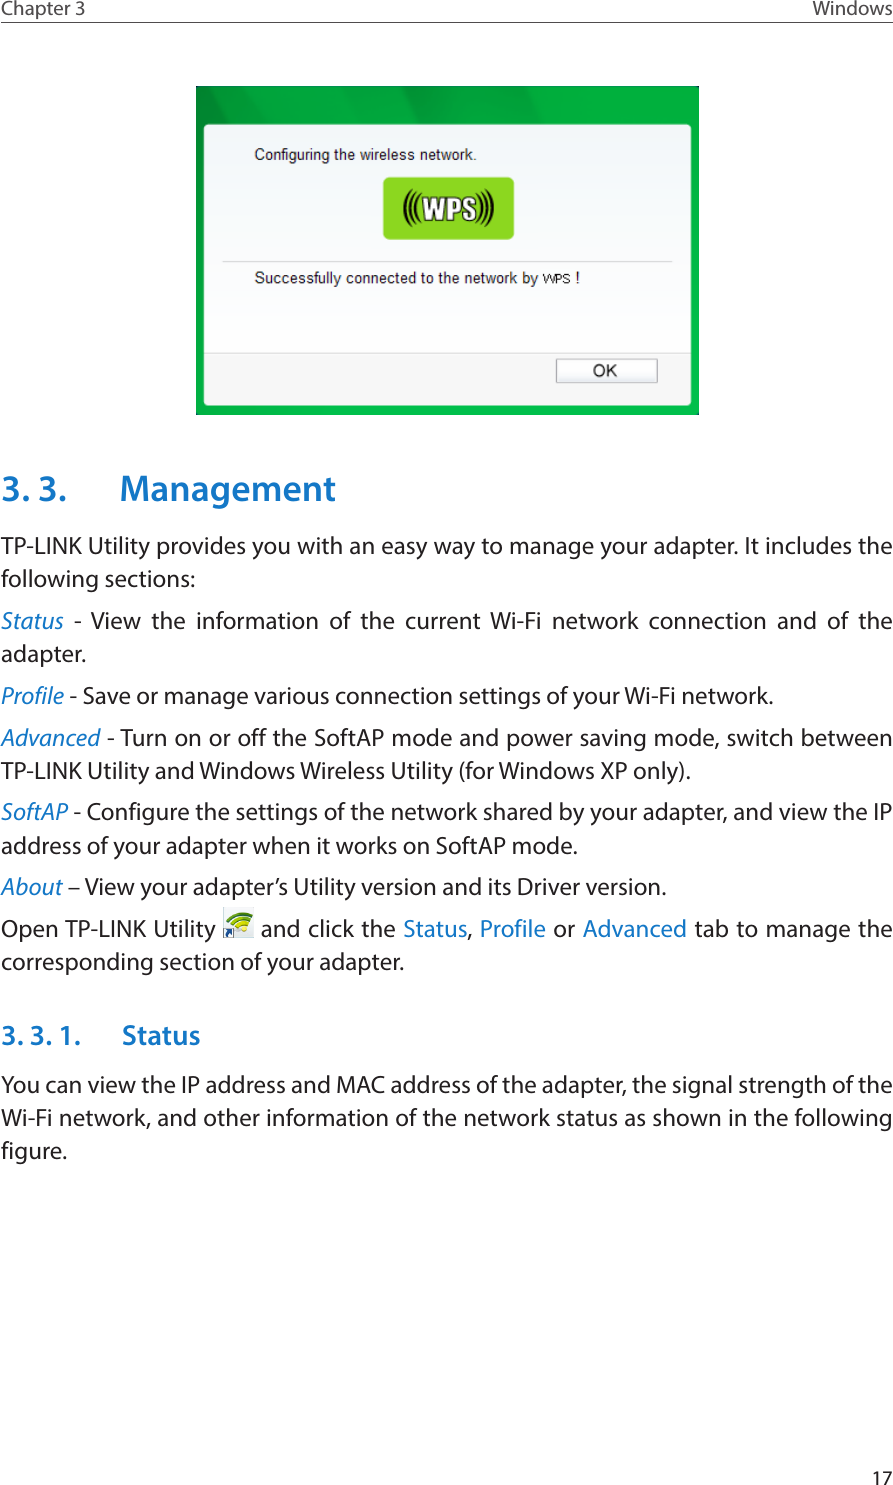 17Chapter 3 Windows3. 3.  ManagementTP-LINK Utility provides you with an easy way to manage your adapter. It includes the following sections:Status - View the information of the current Wi-Fi network connection and of the adapter.Profile - Save or manage various connection settings of your Wi-Fi network.Advanced - Turn on or off the SoftAP mode and power saving mode, switch between TP-LINK Utility and Windows Wireless Utility (for Windows XP only).SoftAP - Configure the settings of the network shared by your adapter, and view the IP address of your adapter when it works on SoftAP mode.About – View your adapter’s Utility version and its Driver version.Open TP-LINK Utility   and click the Status, Profile or Advanced tab to manage the corresponding section of your adapter.3. 3. 1.  StatusYou can view the IP address and MAC address of the adapter, the signal strength of the Wi-Fi network, and other information of the network status as shown in the following figure.